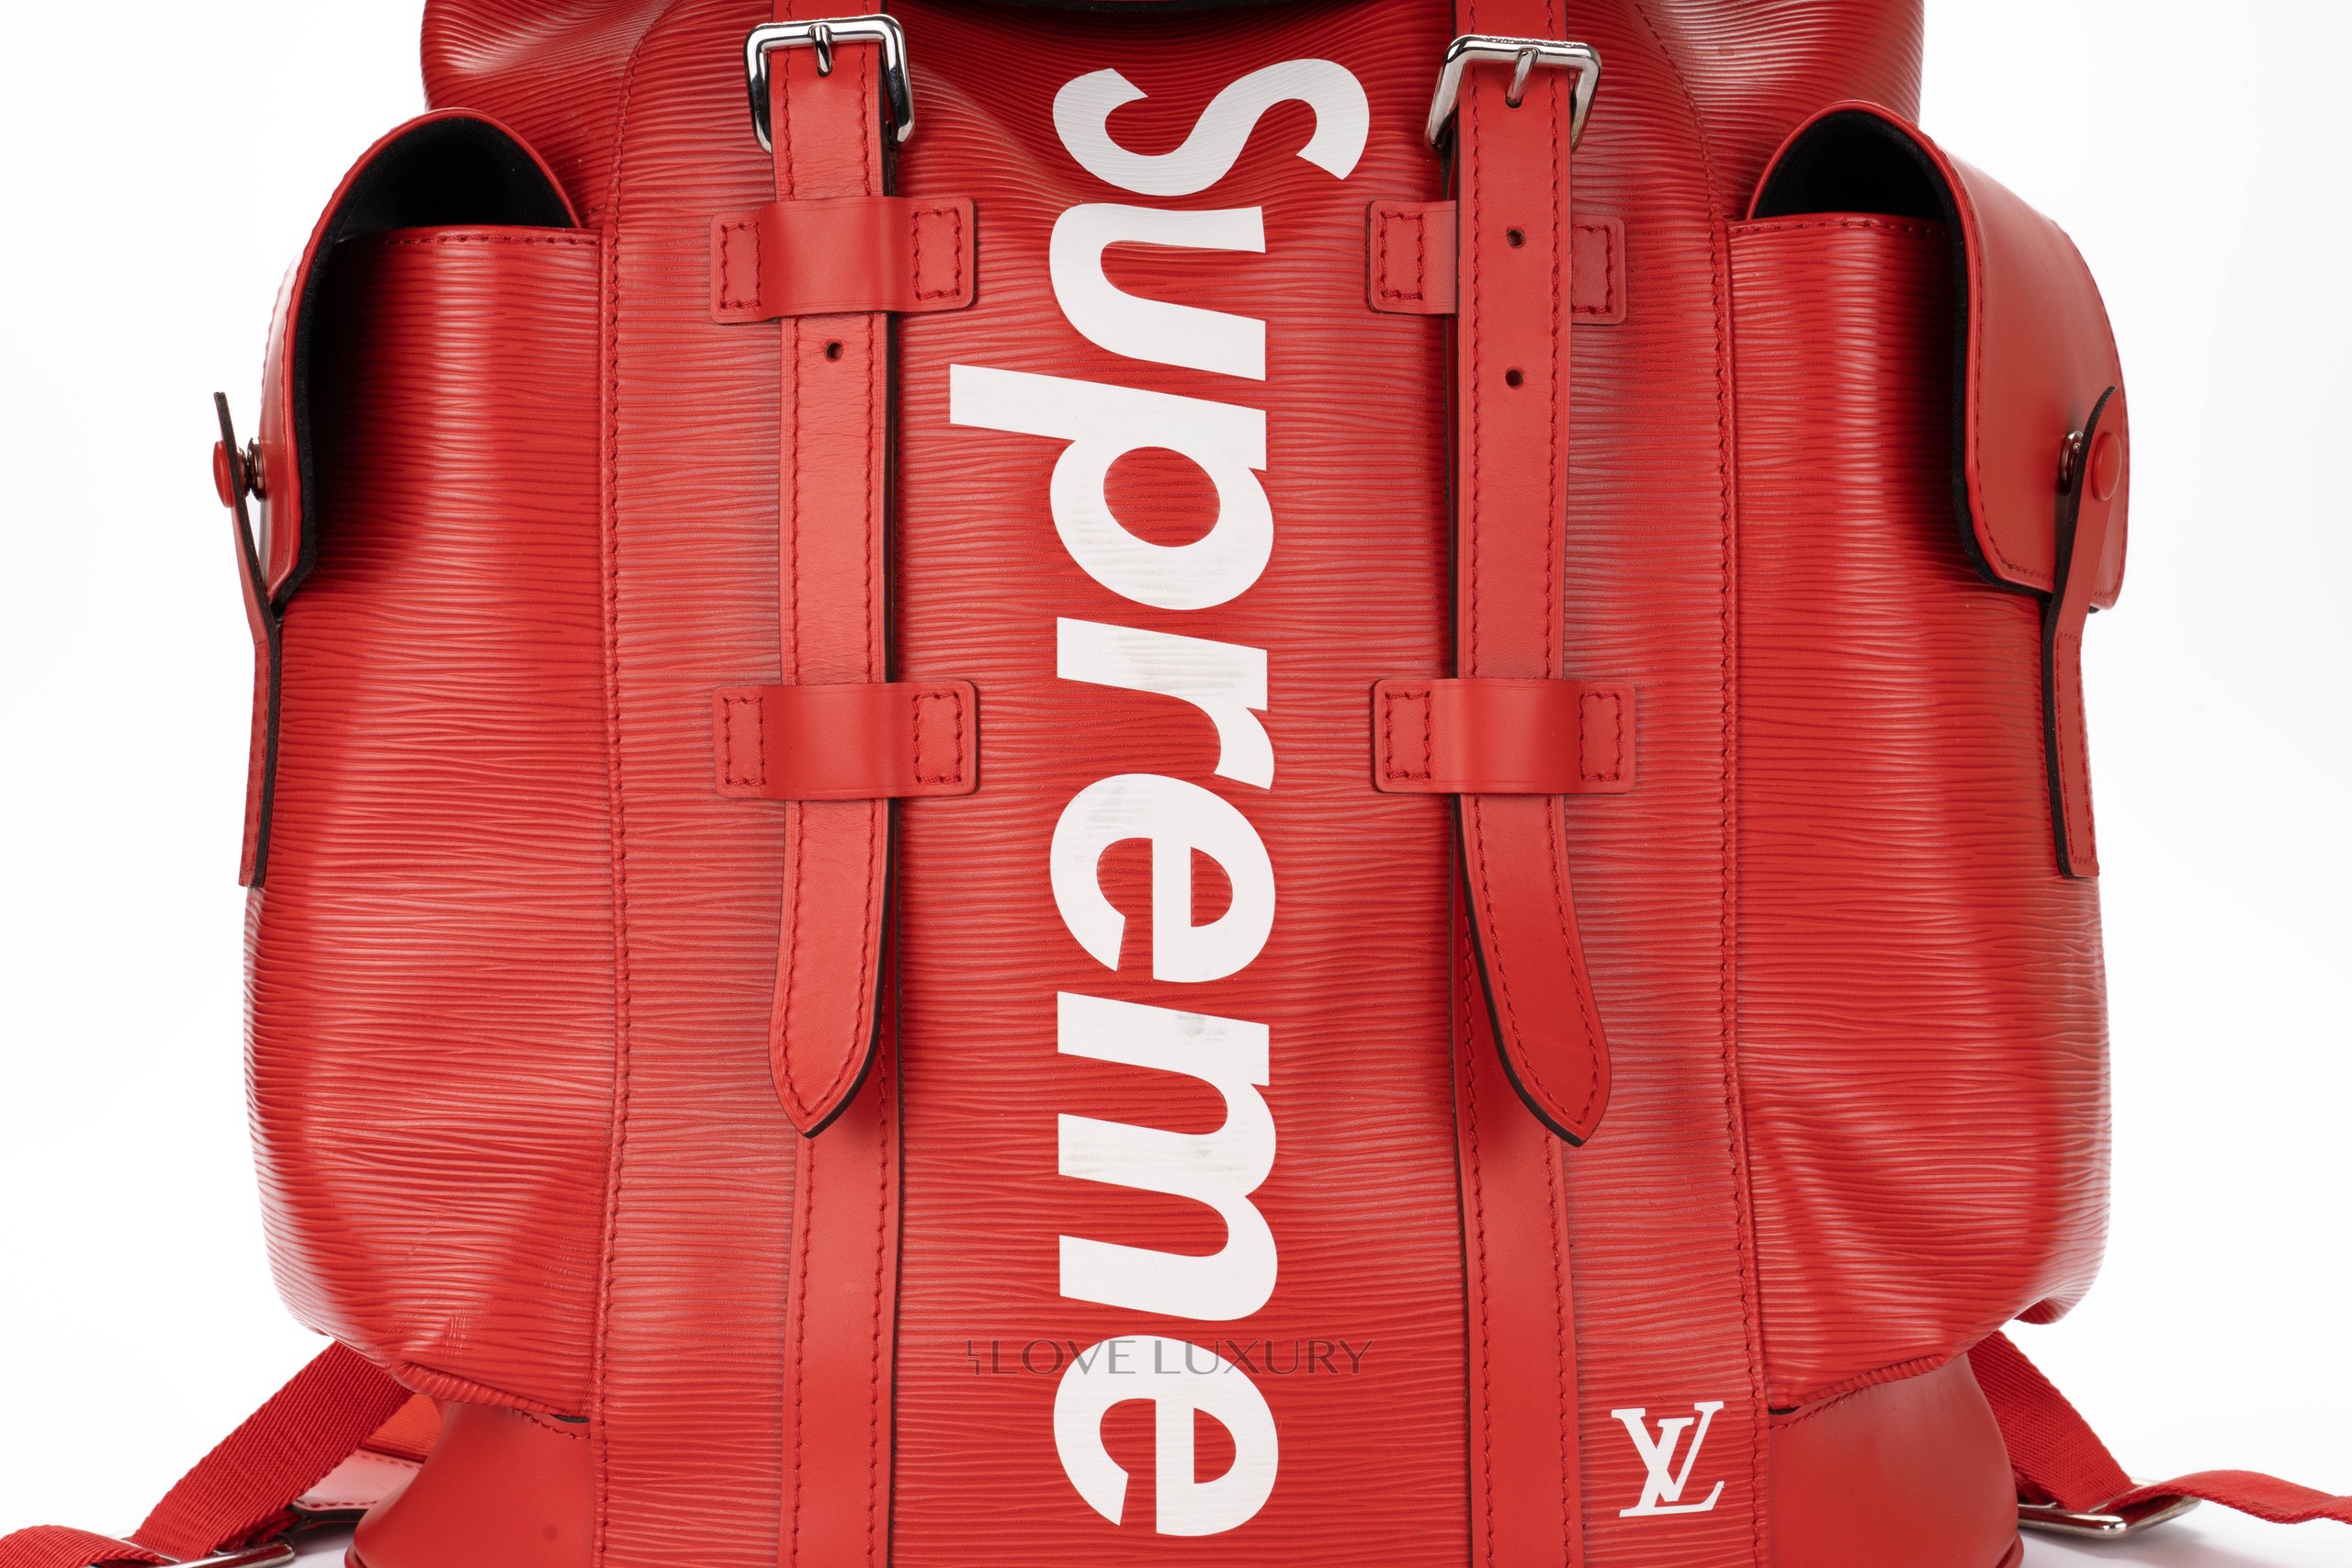 Louis Vuitton x Supreme Christopher Backpack Epi PM Red - US